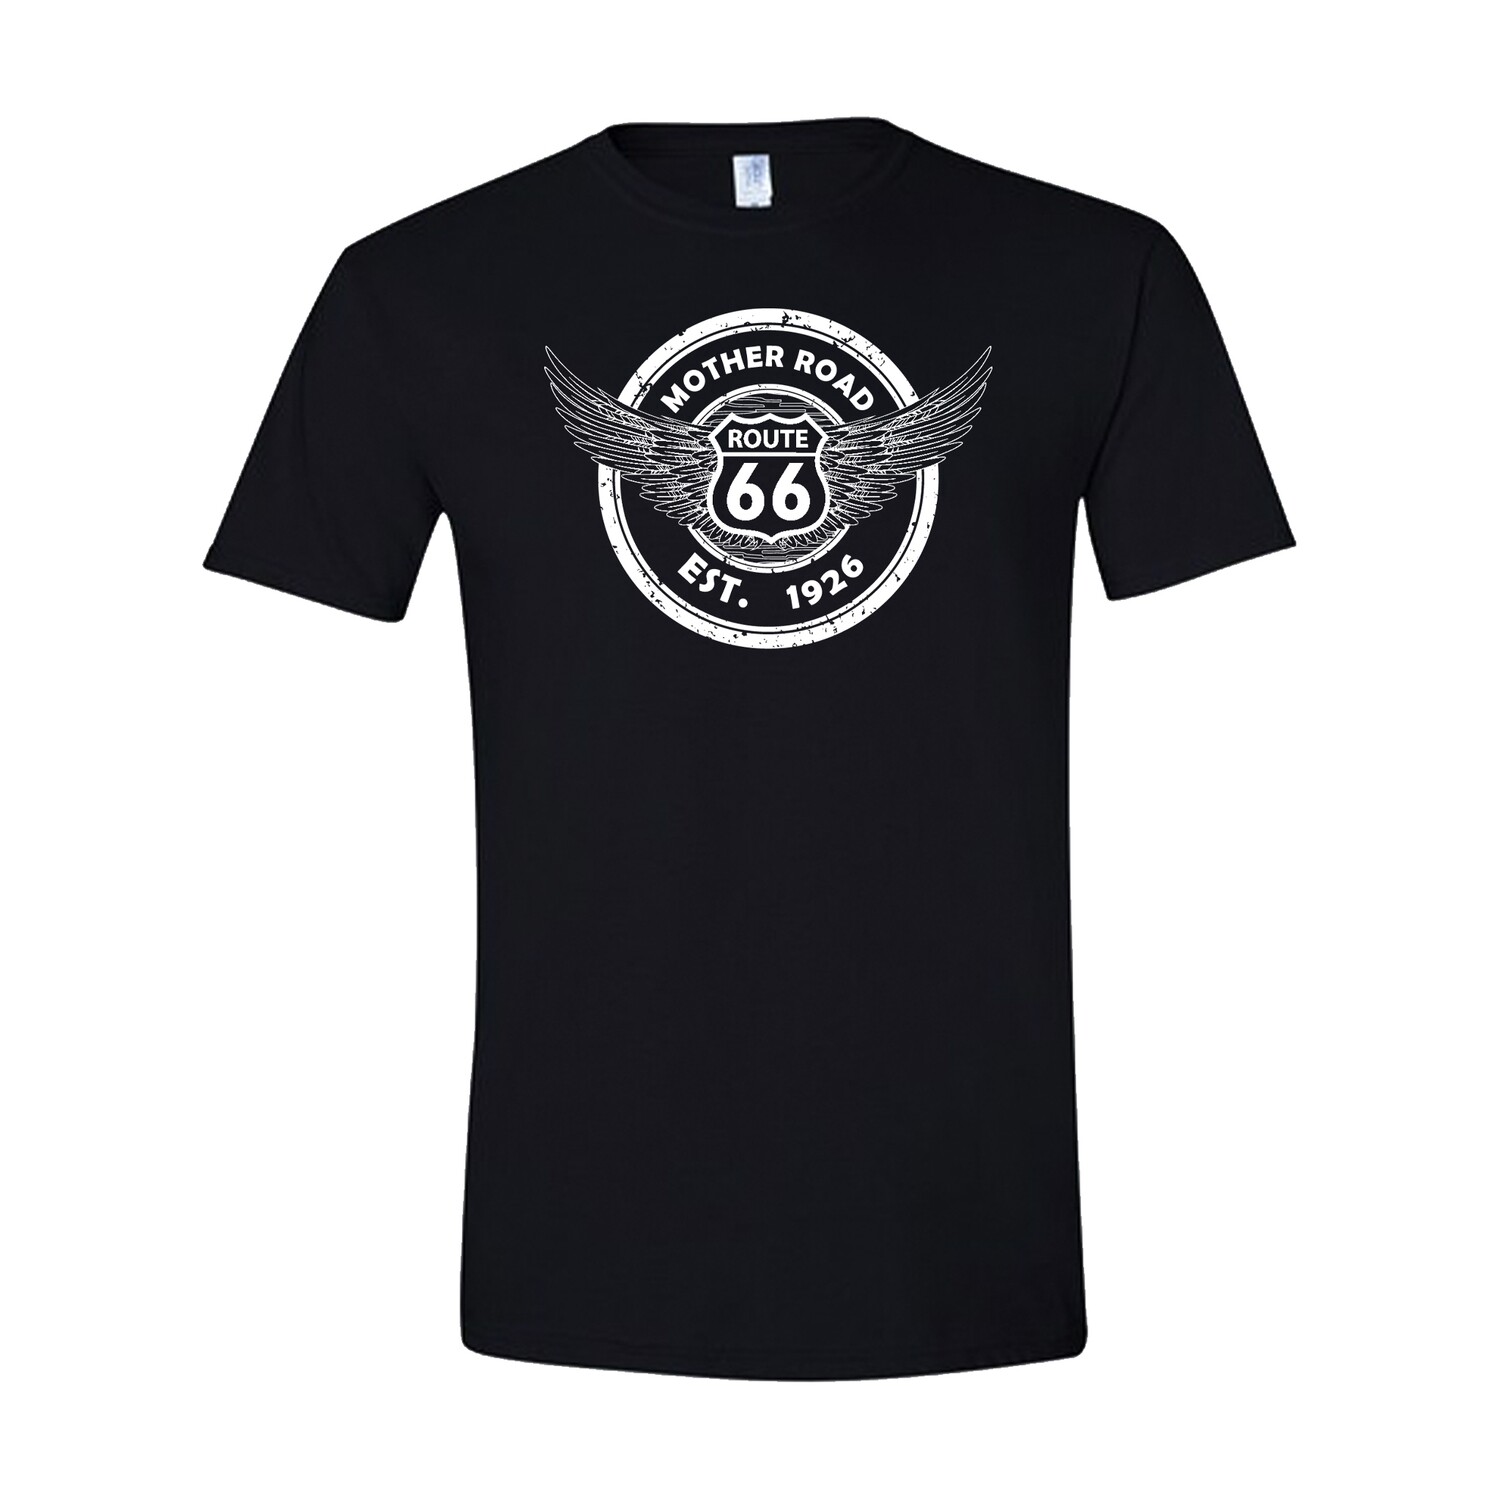 Route 66 Wings Shirt